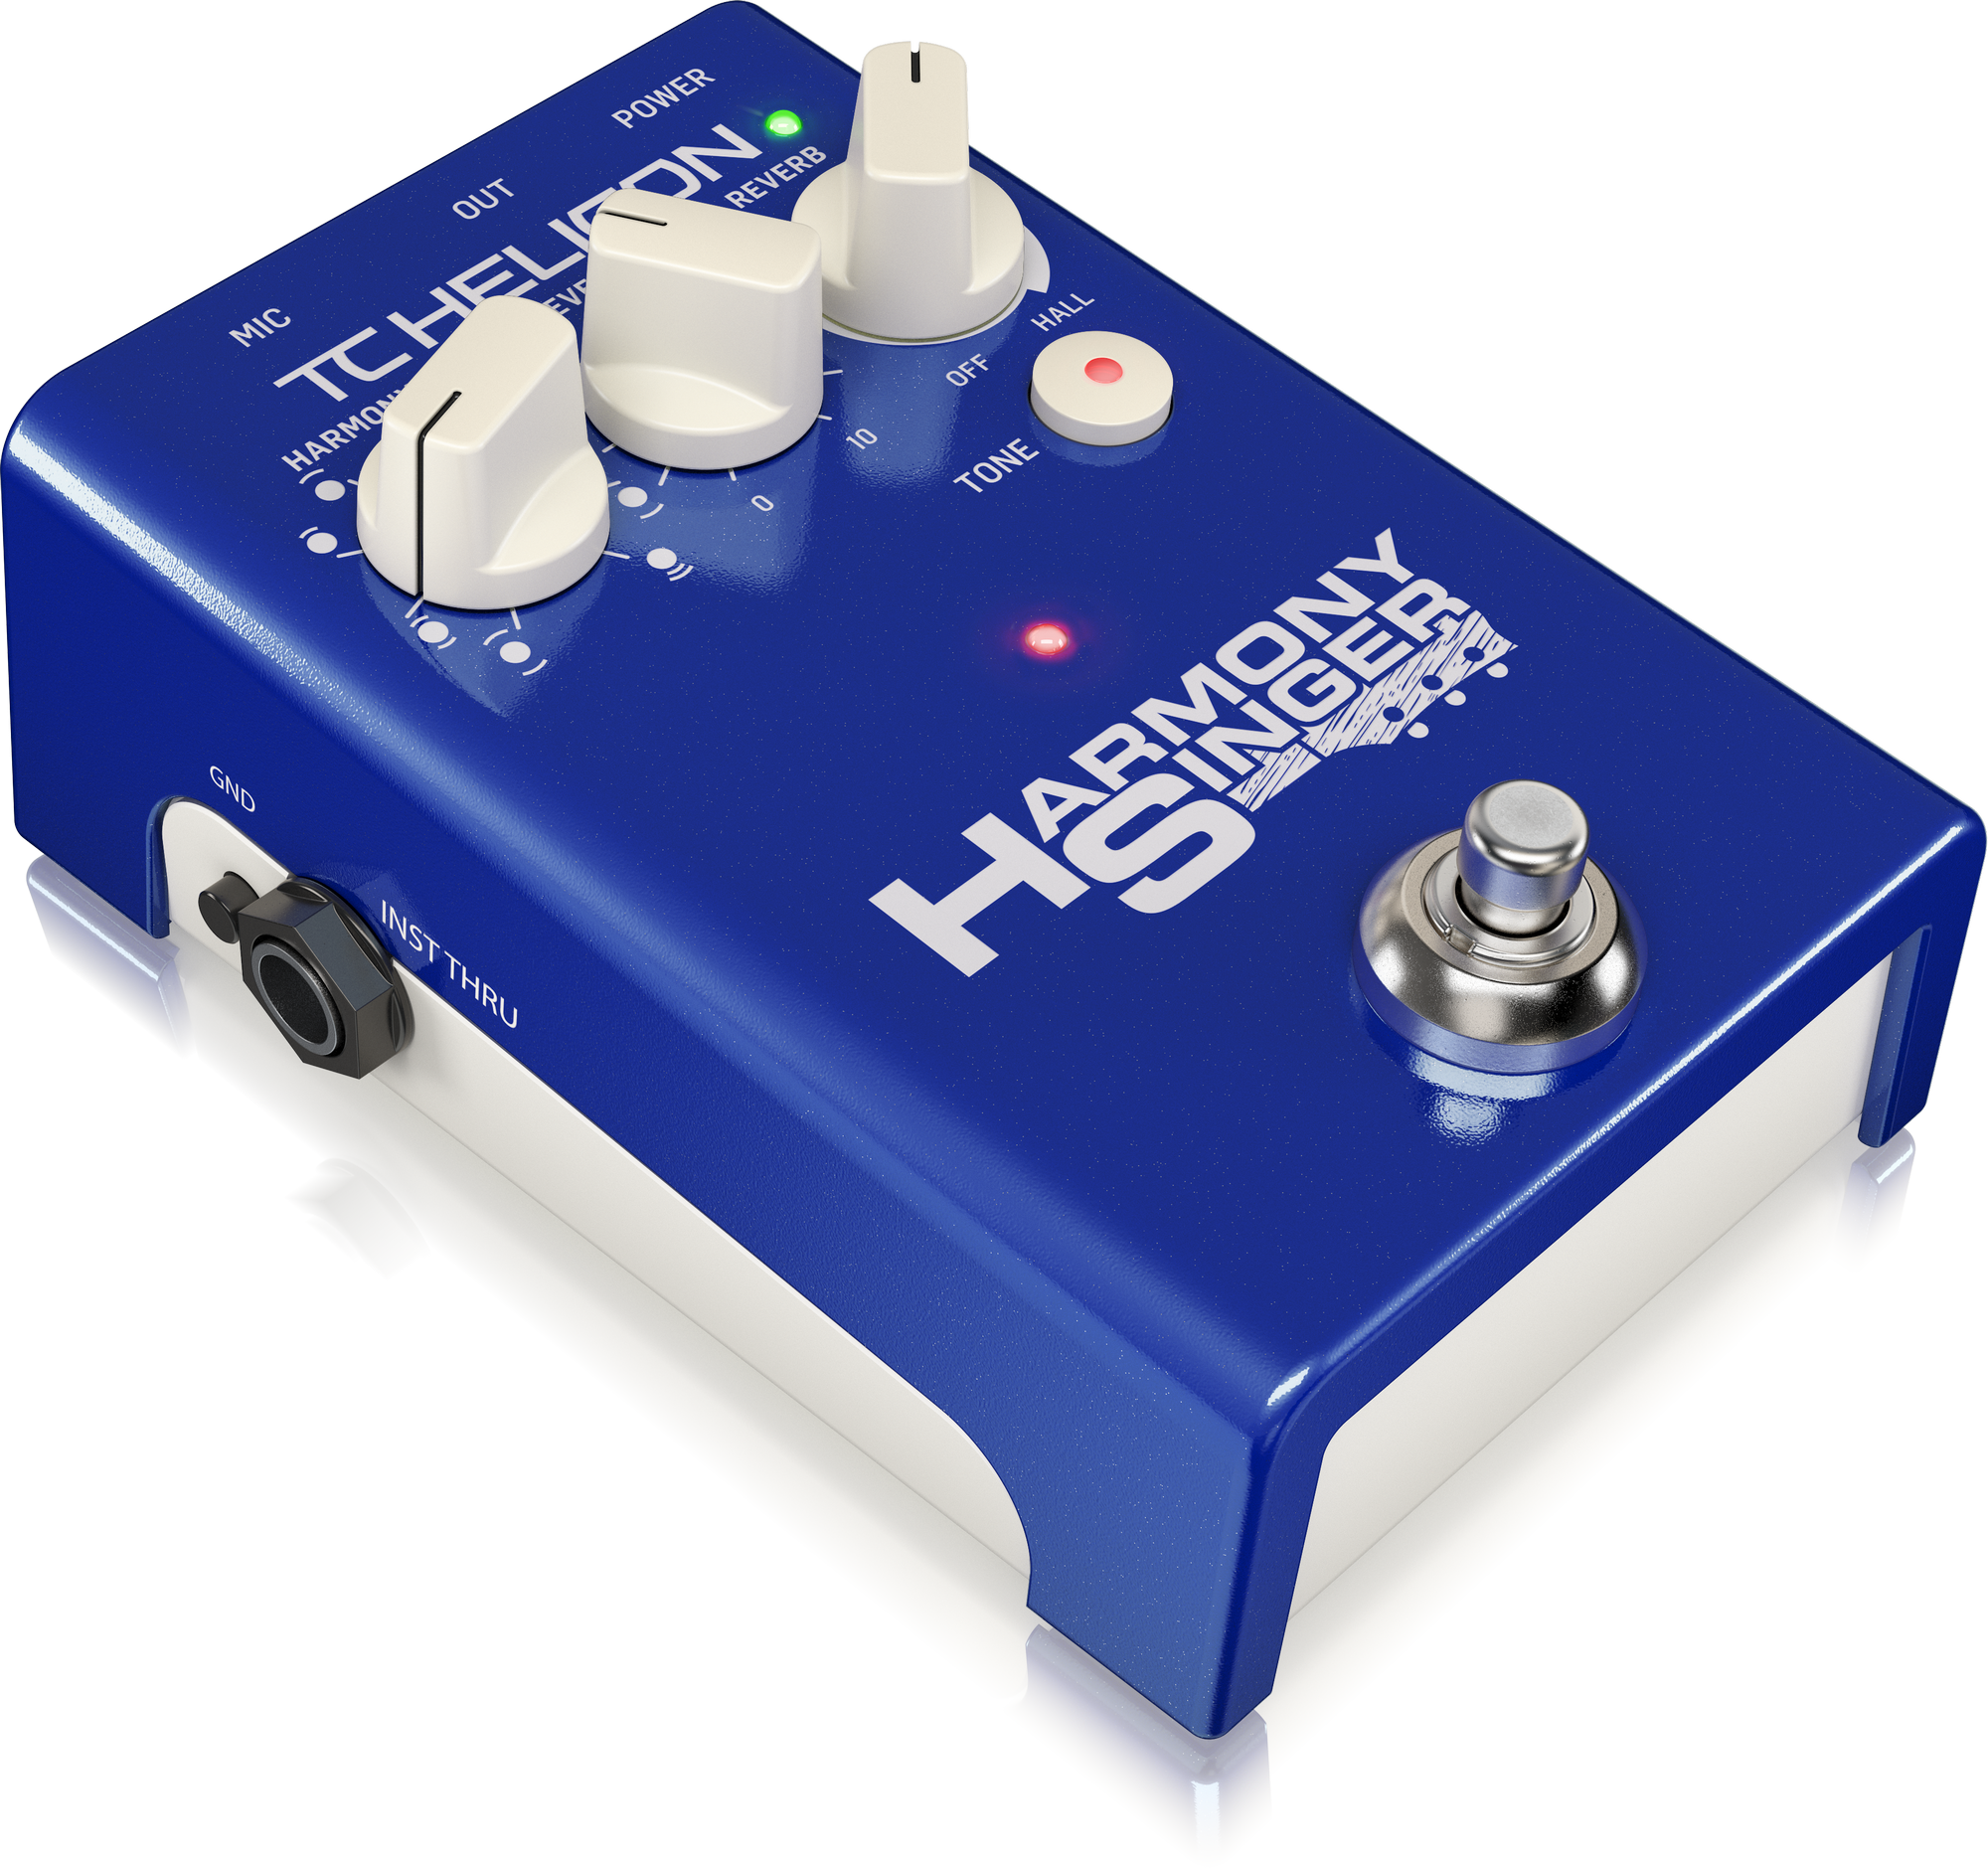 New TC-Helicon Harmony Singer 2 Live Harmonizer Vocal Processor Effects Pedal! 